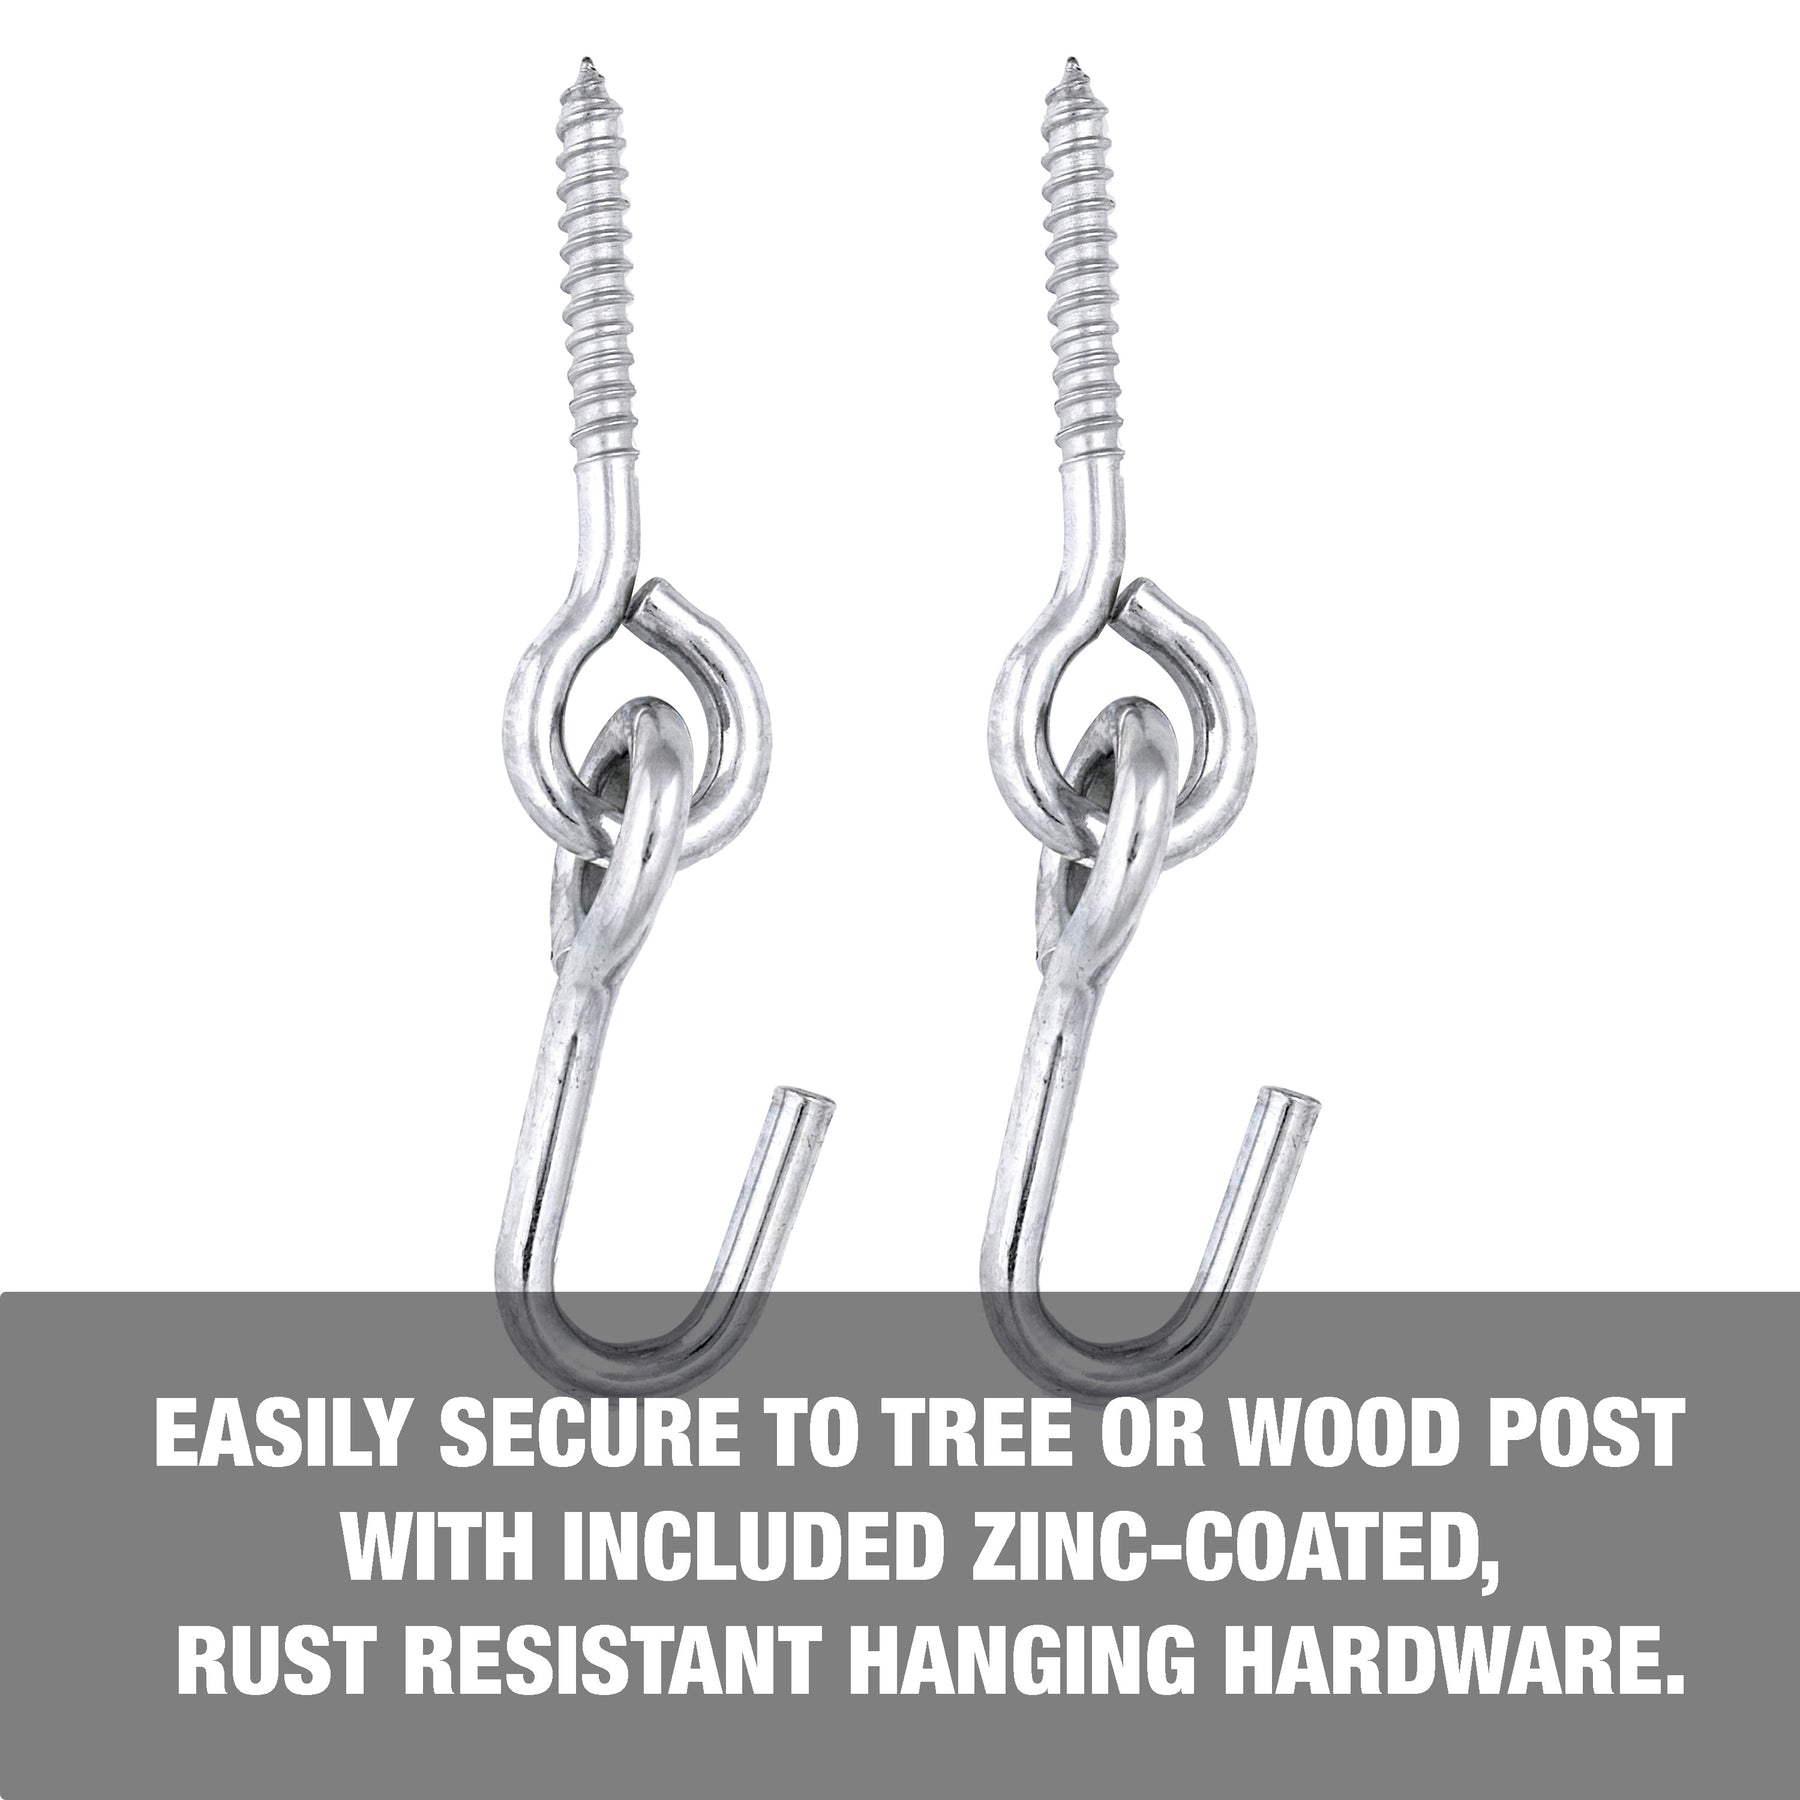 Easily secure to tree or wood post with included zinc-coated, rust-resistant hanging hardware.